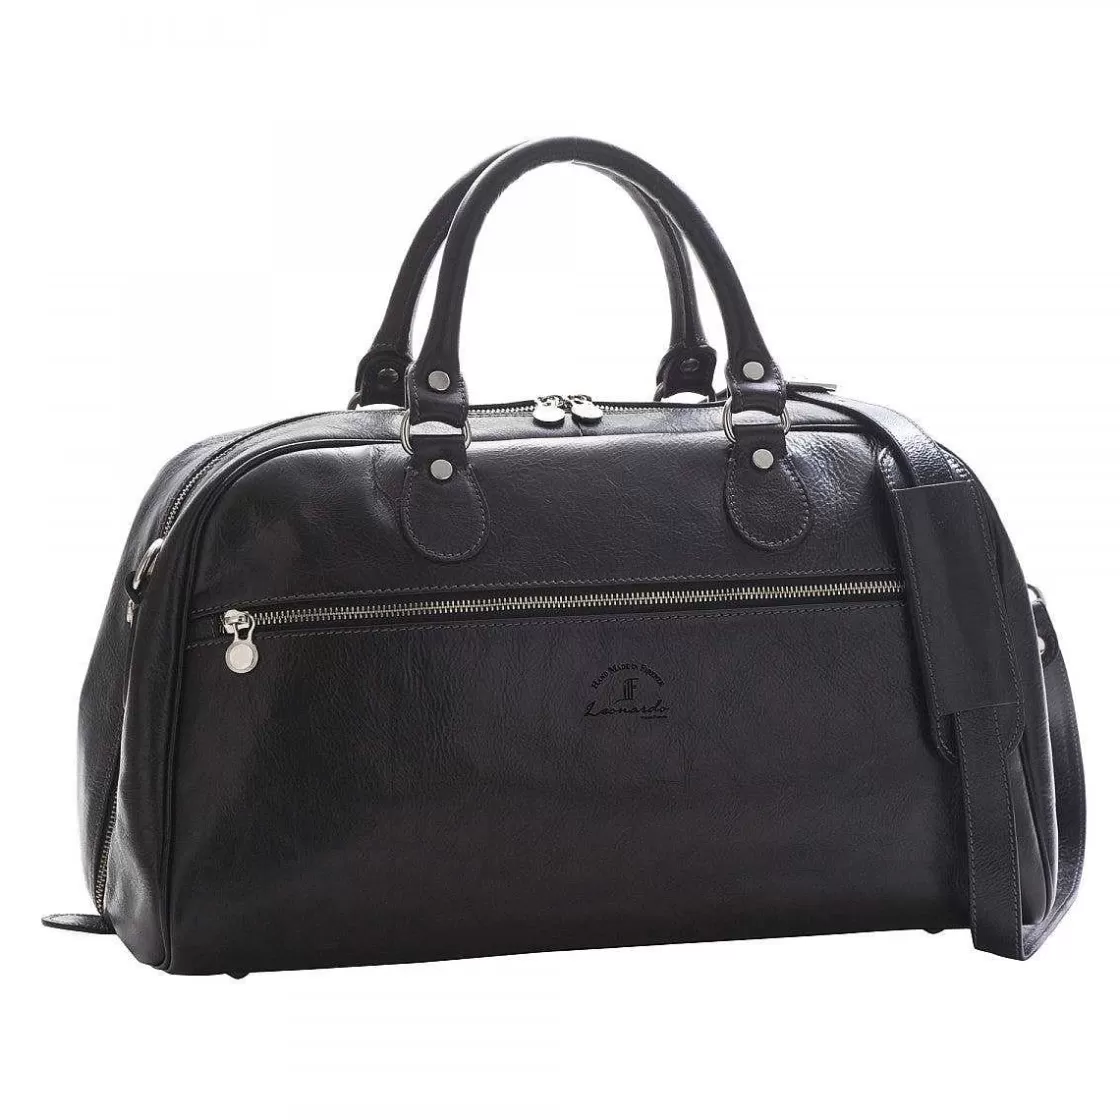 Leonardo Small Travel Bag In Full Grain Leather With Double Zip Front Pocket And Adjustable Shoulder Strap Fashion